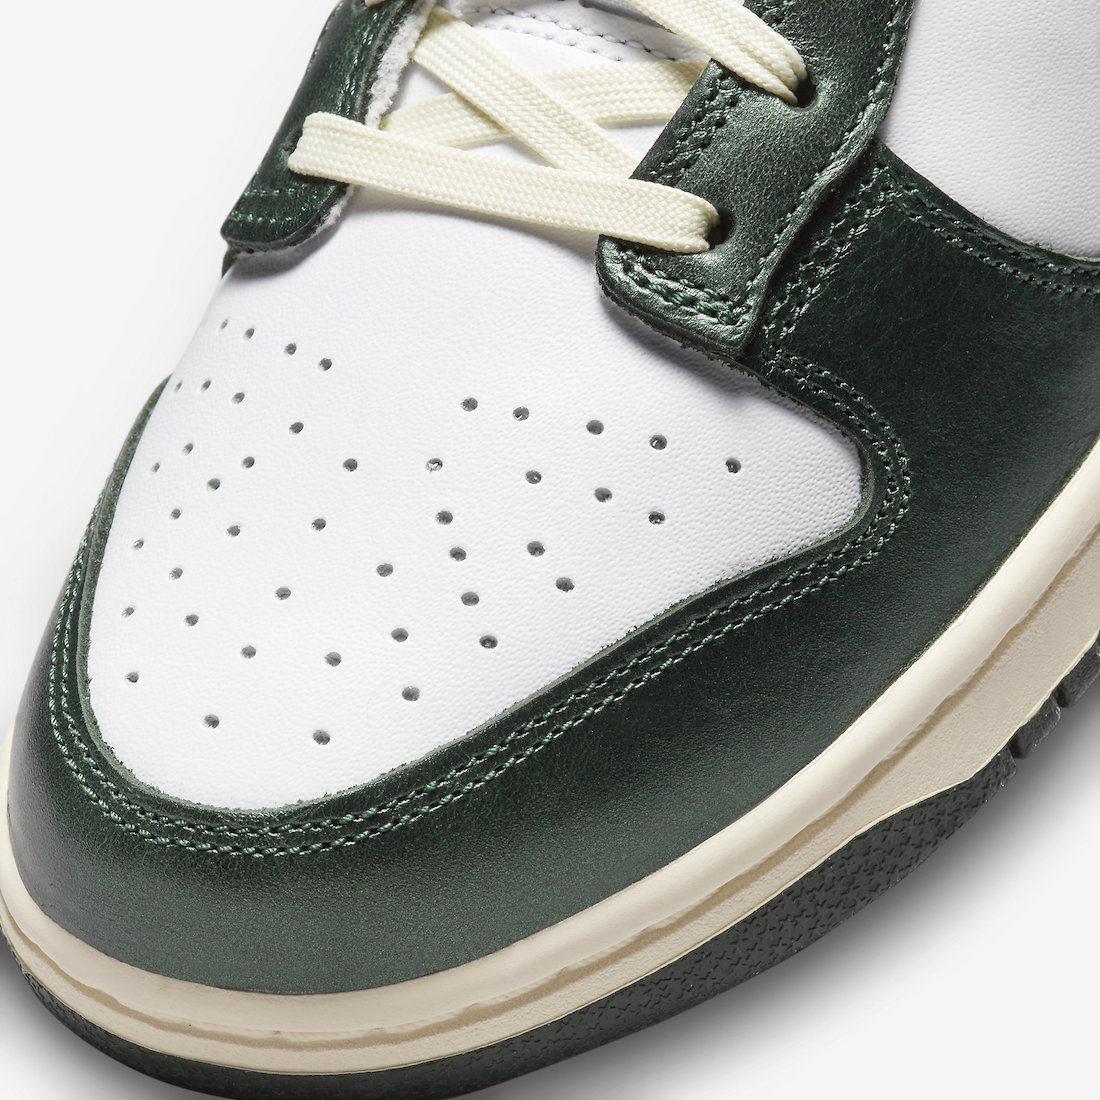 Nike Dunk Low Vintage Green DQ8580-100 Release Date